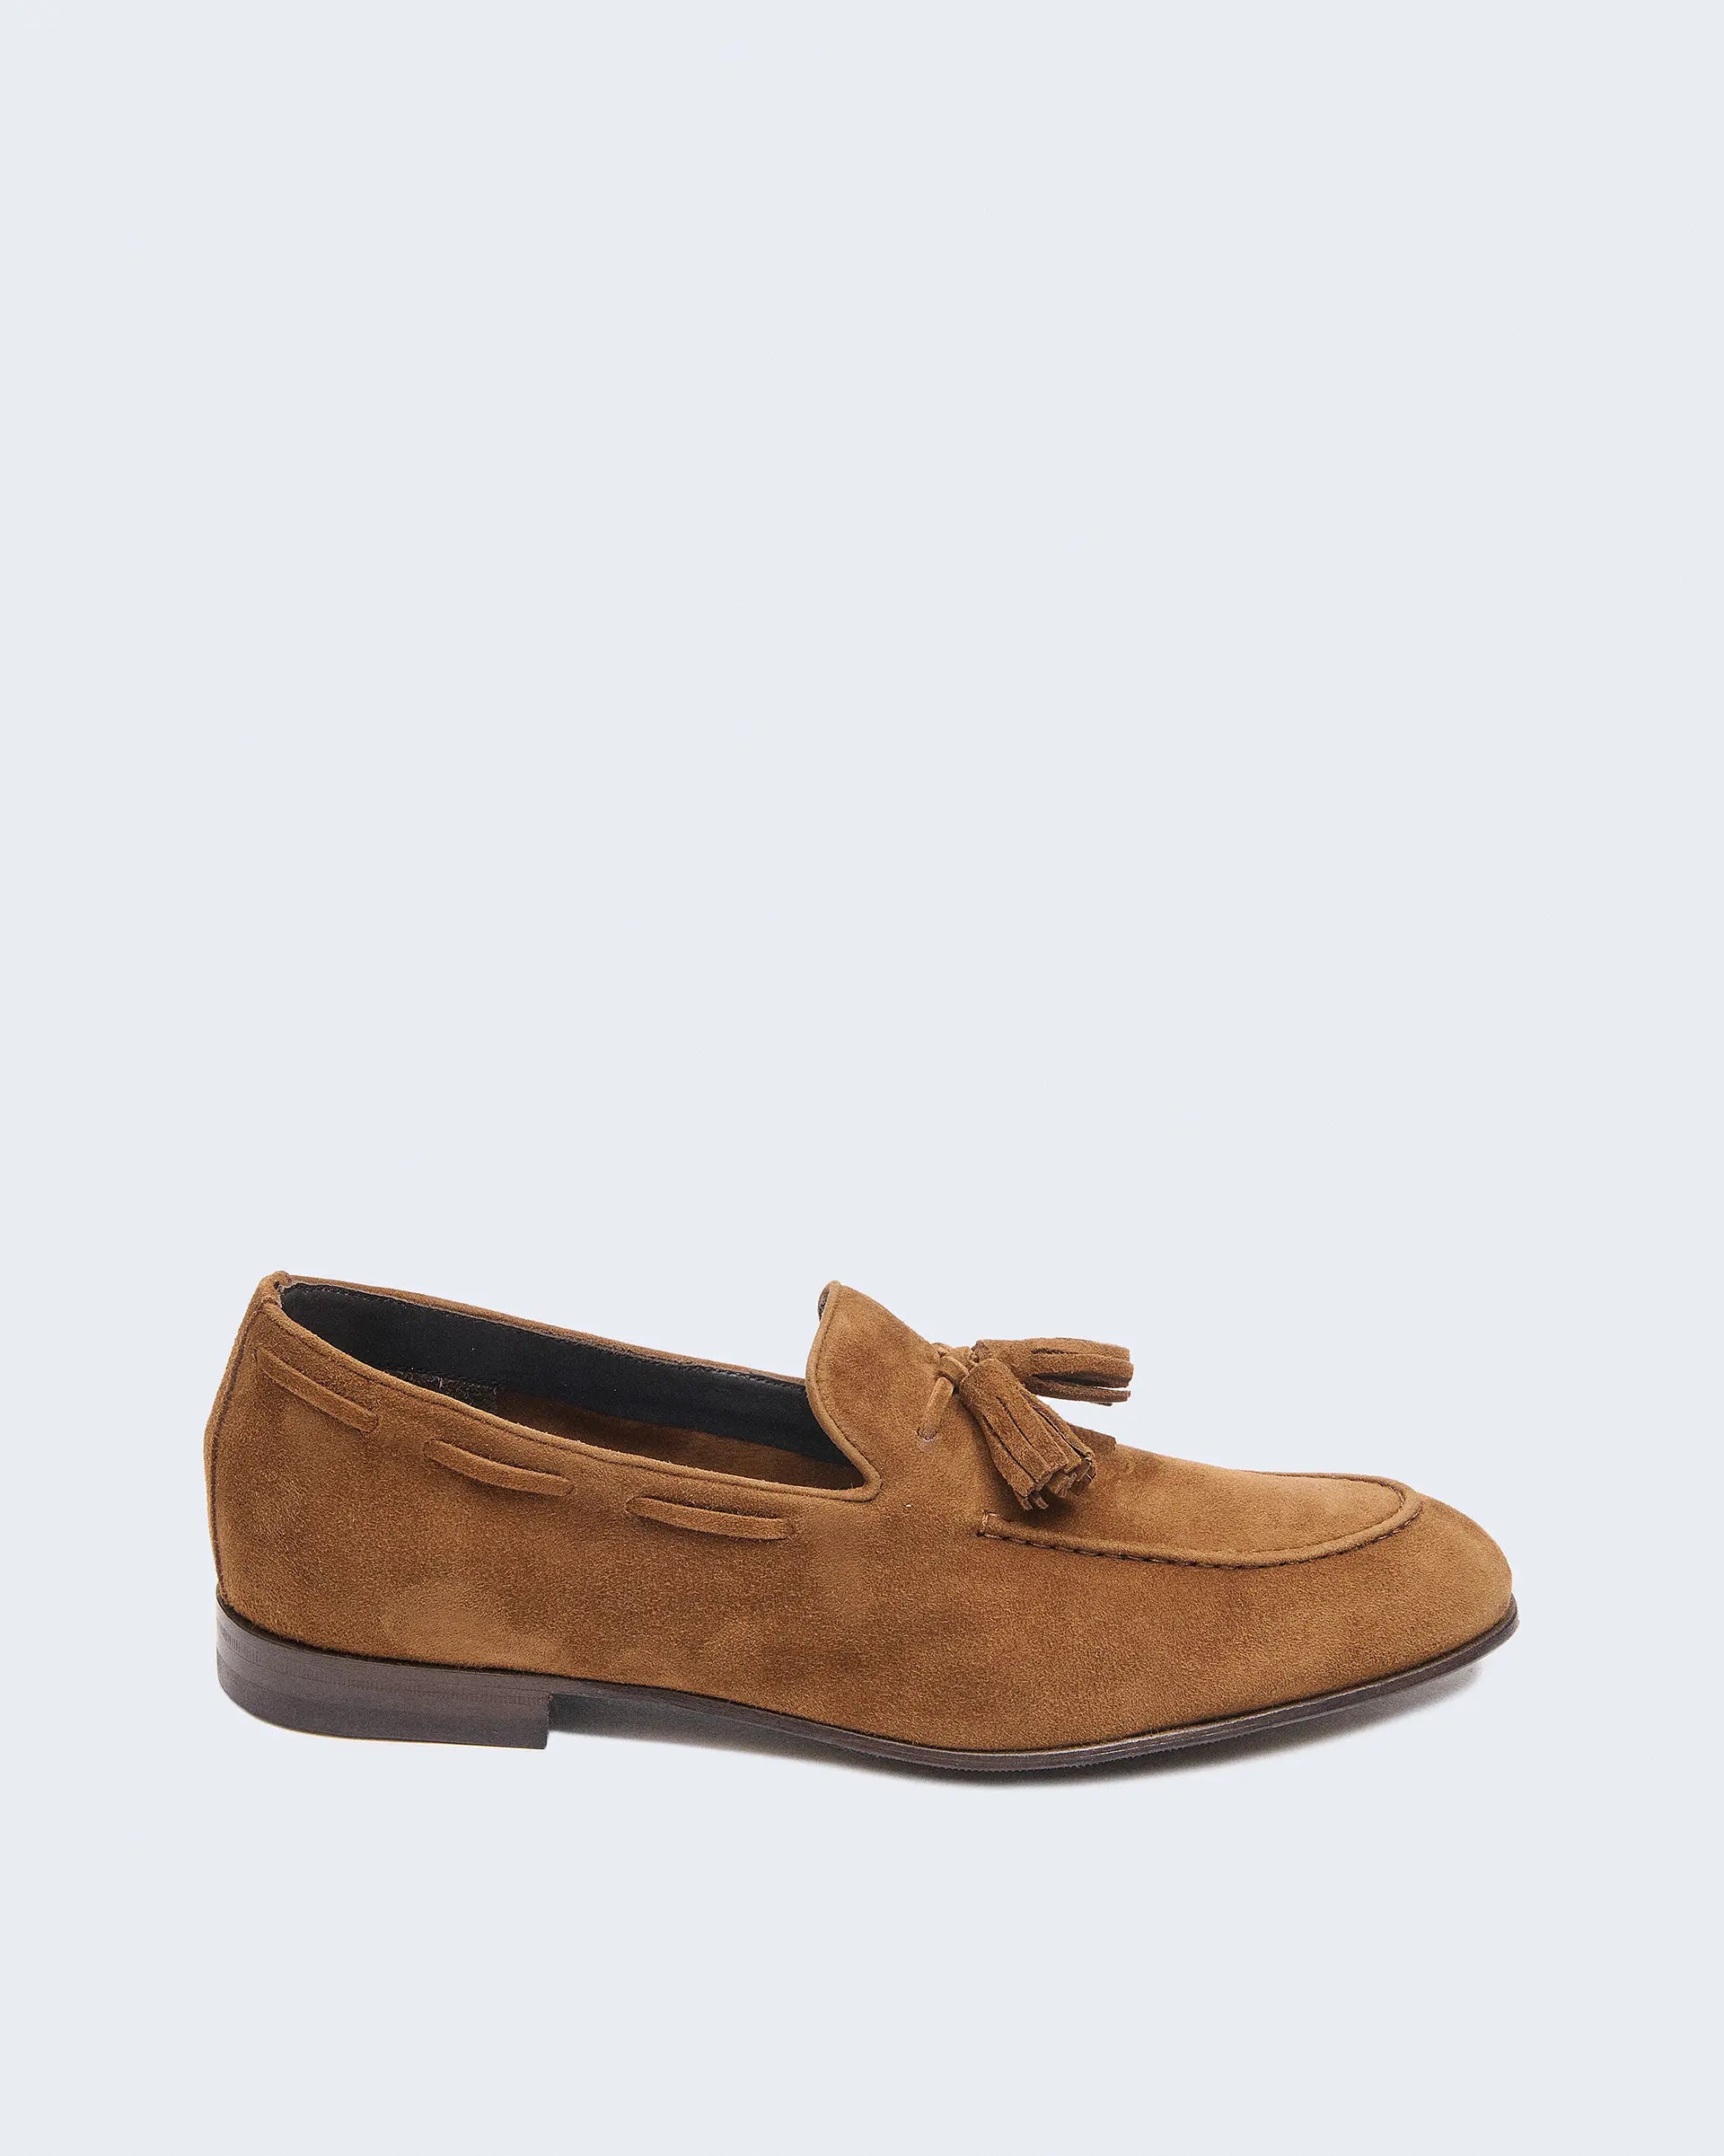 Moccasin with walnut tassels in light suede